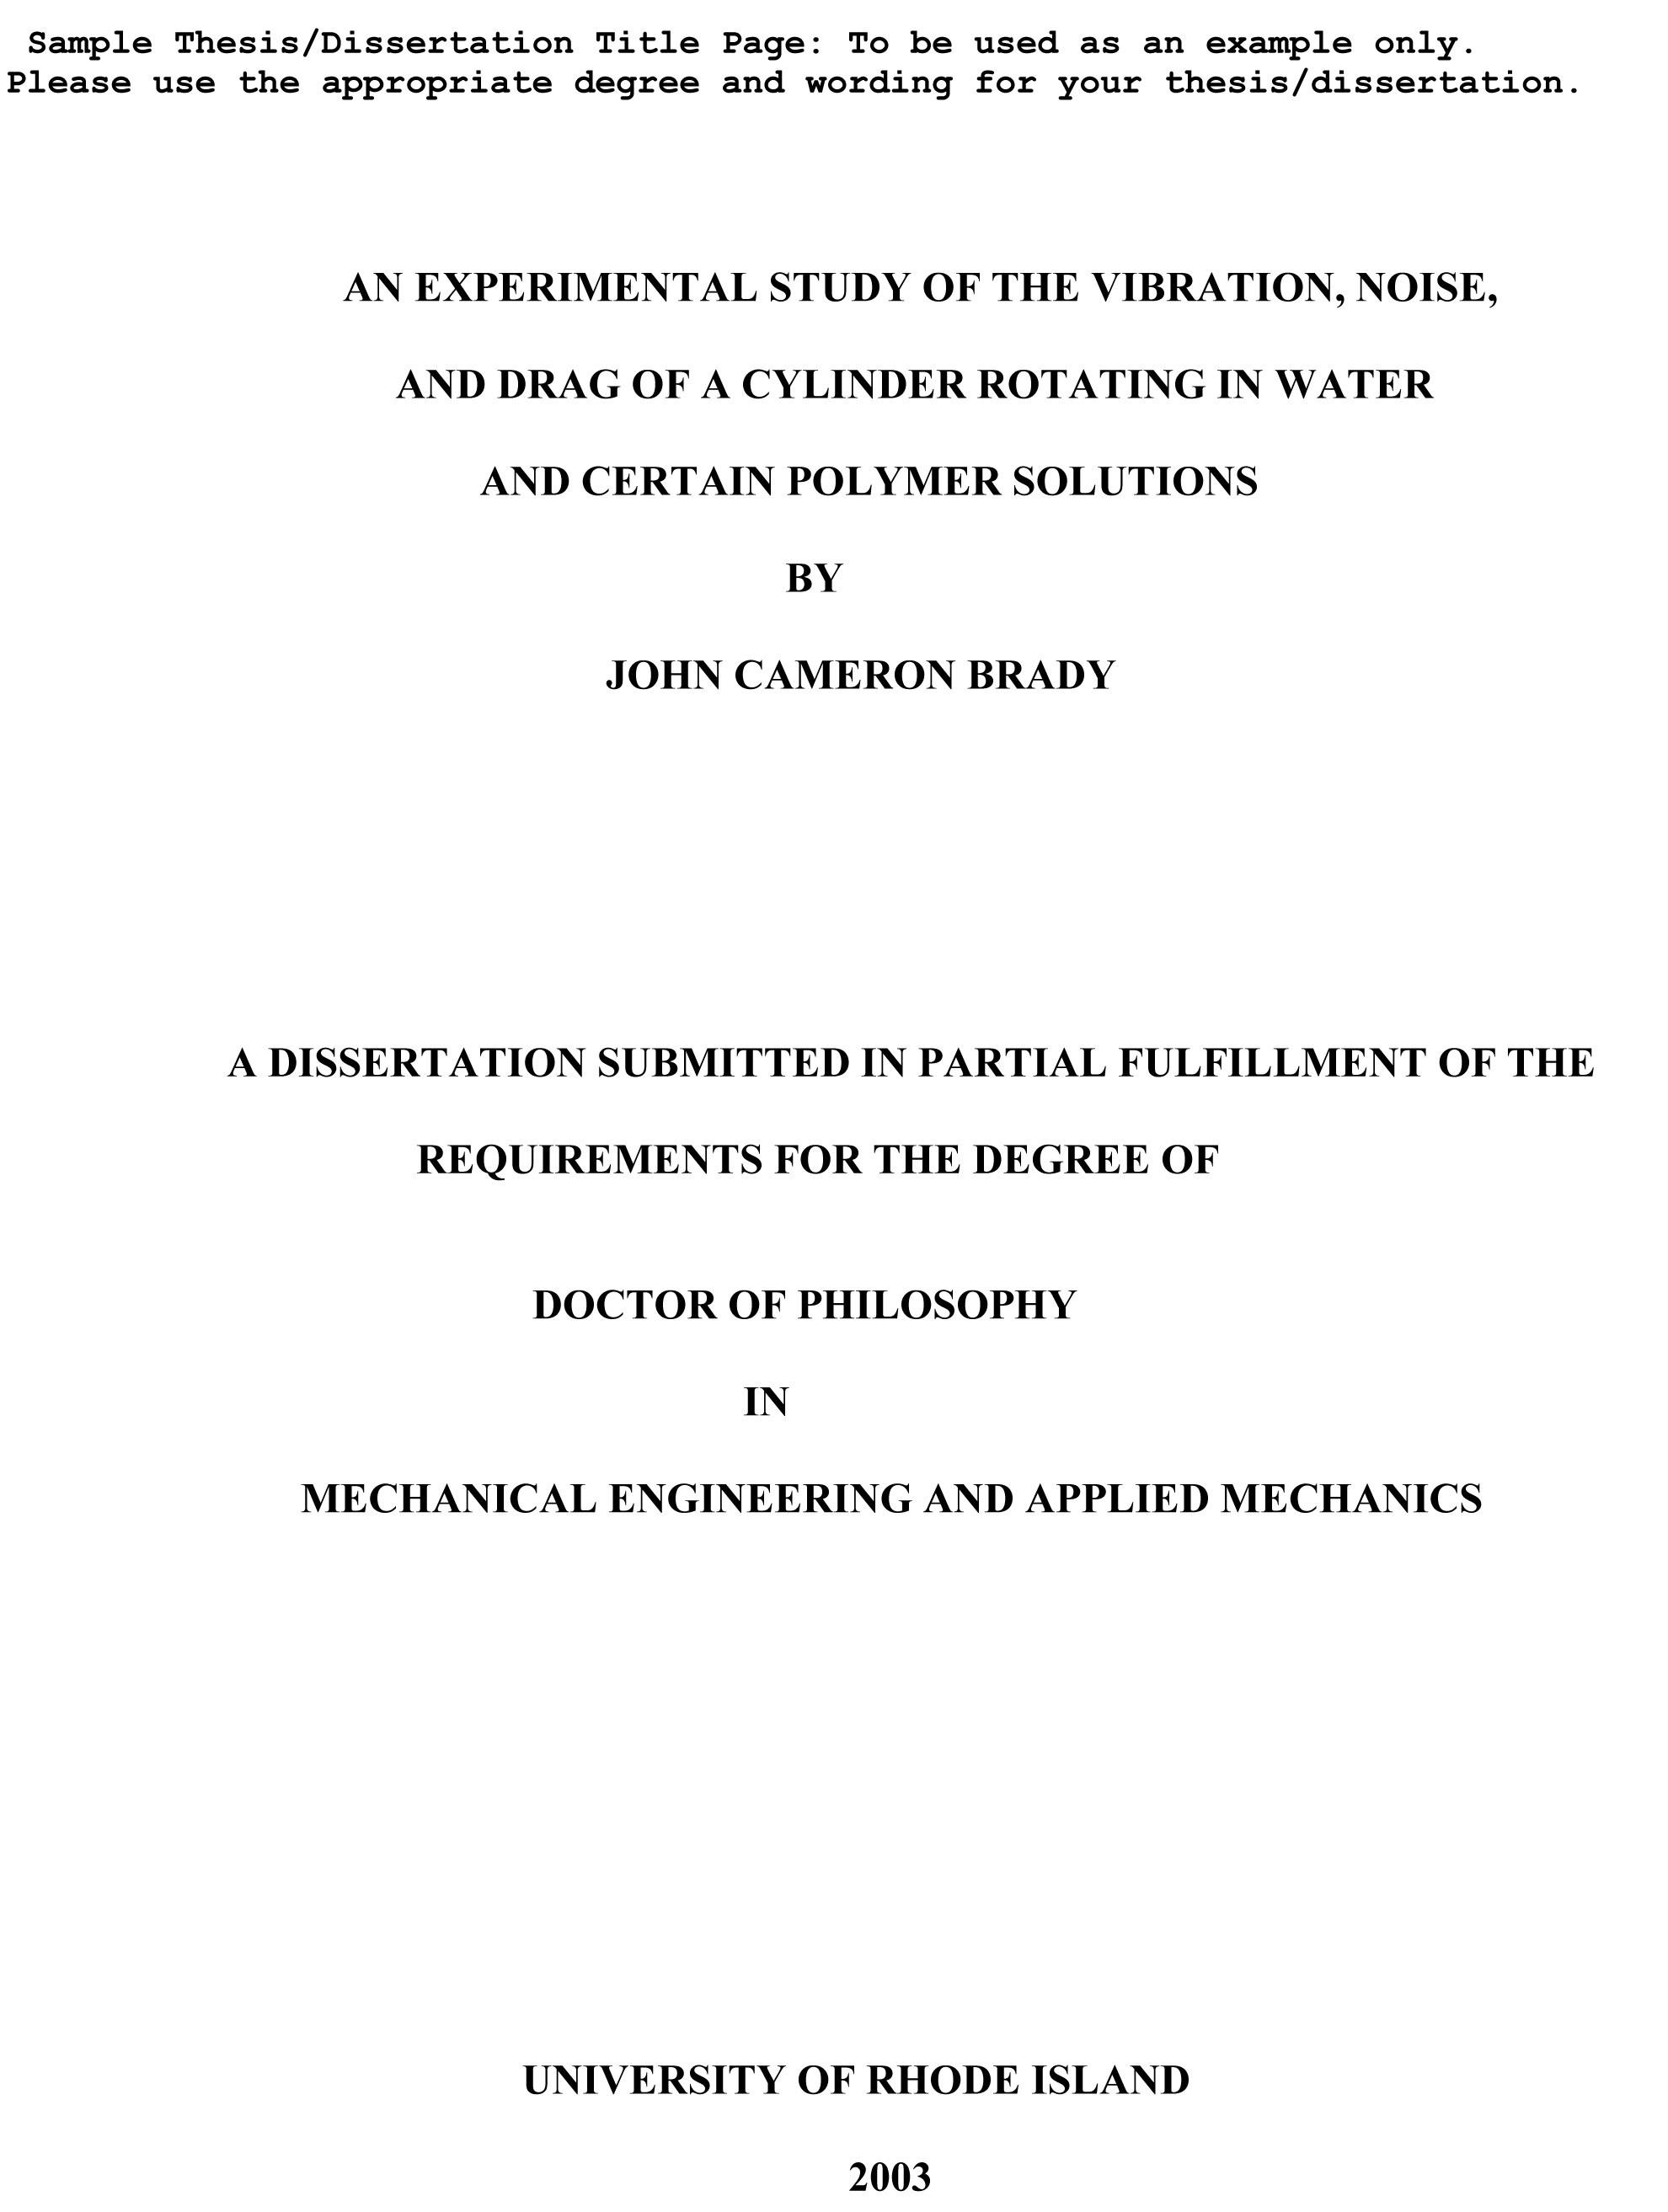 Dissertation thesis title